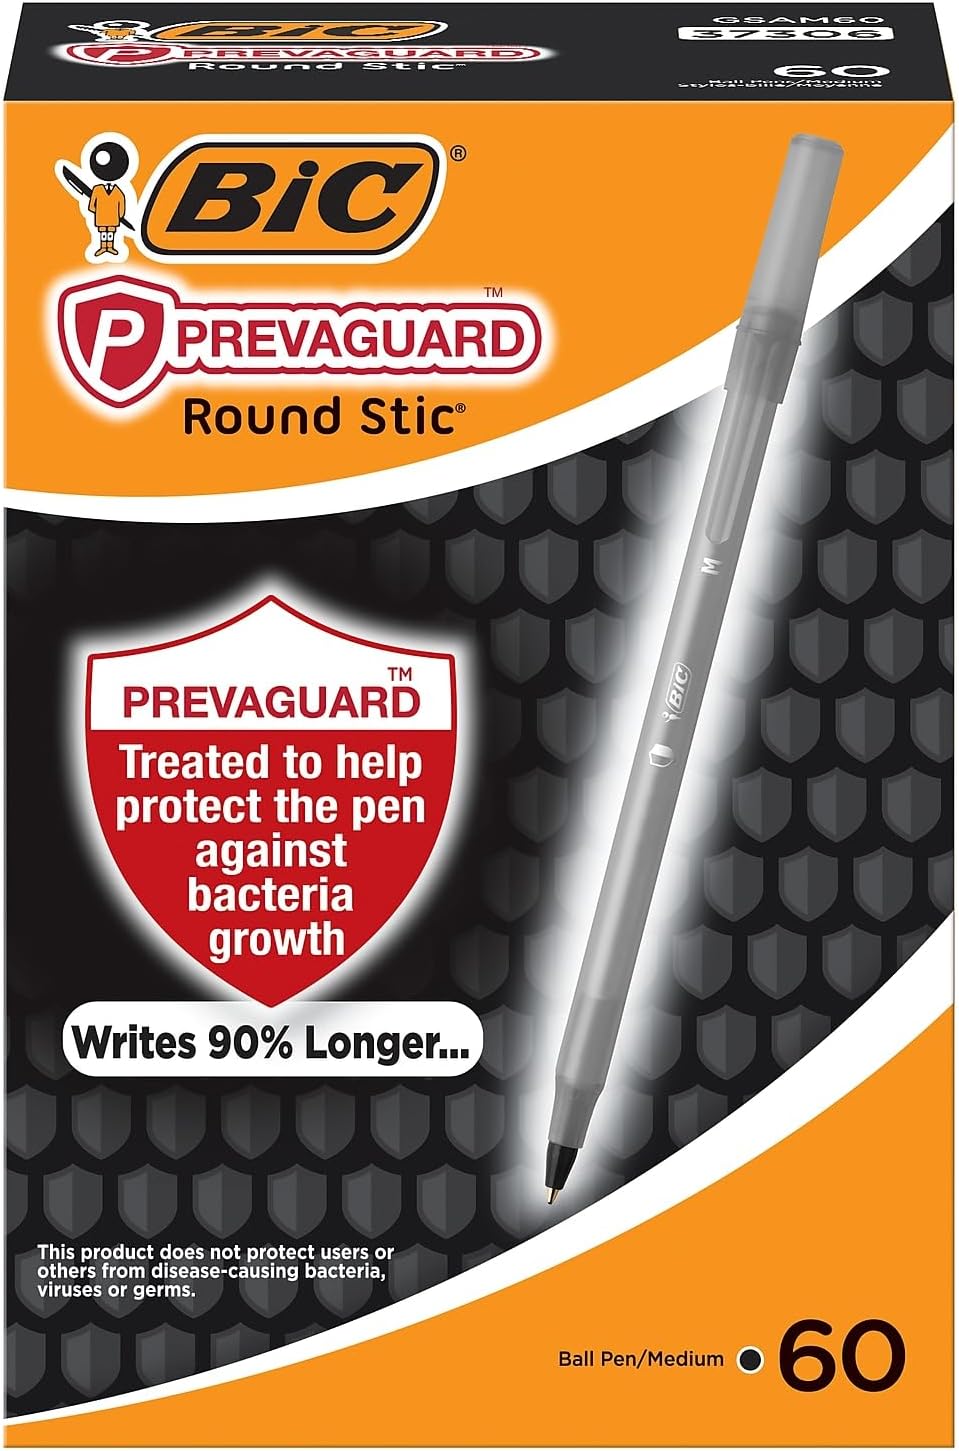 BIC PrevaGuard Round Stic Ballpoint Pen With Built-in Protection To Suppress Bacteria Growth, Medium Point (1.0 mm), Black, 60-Count